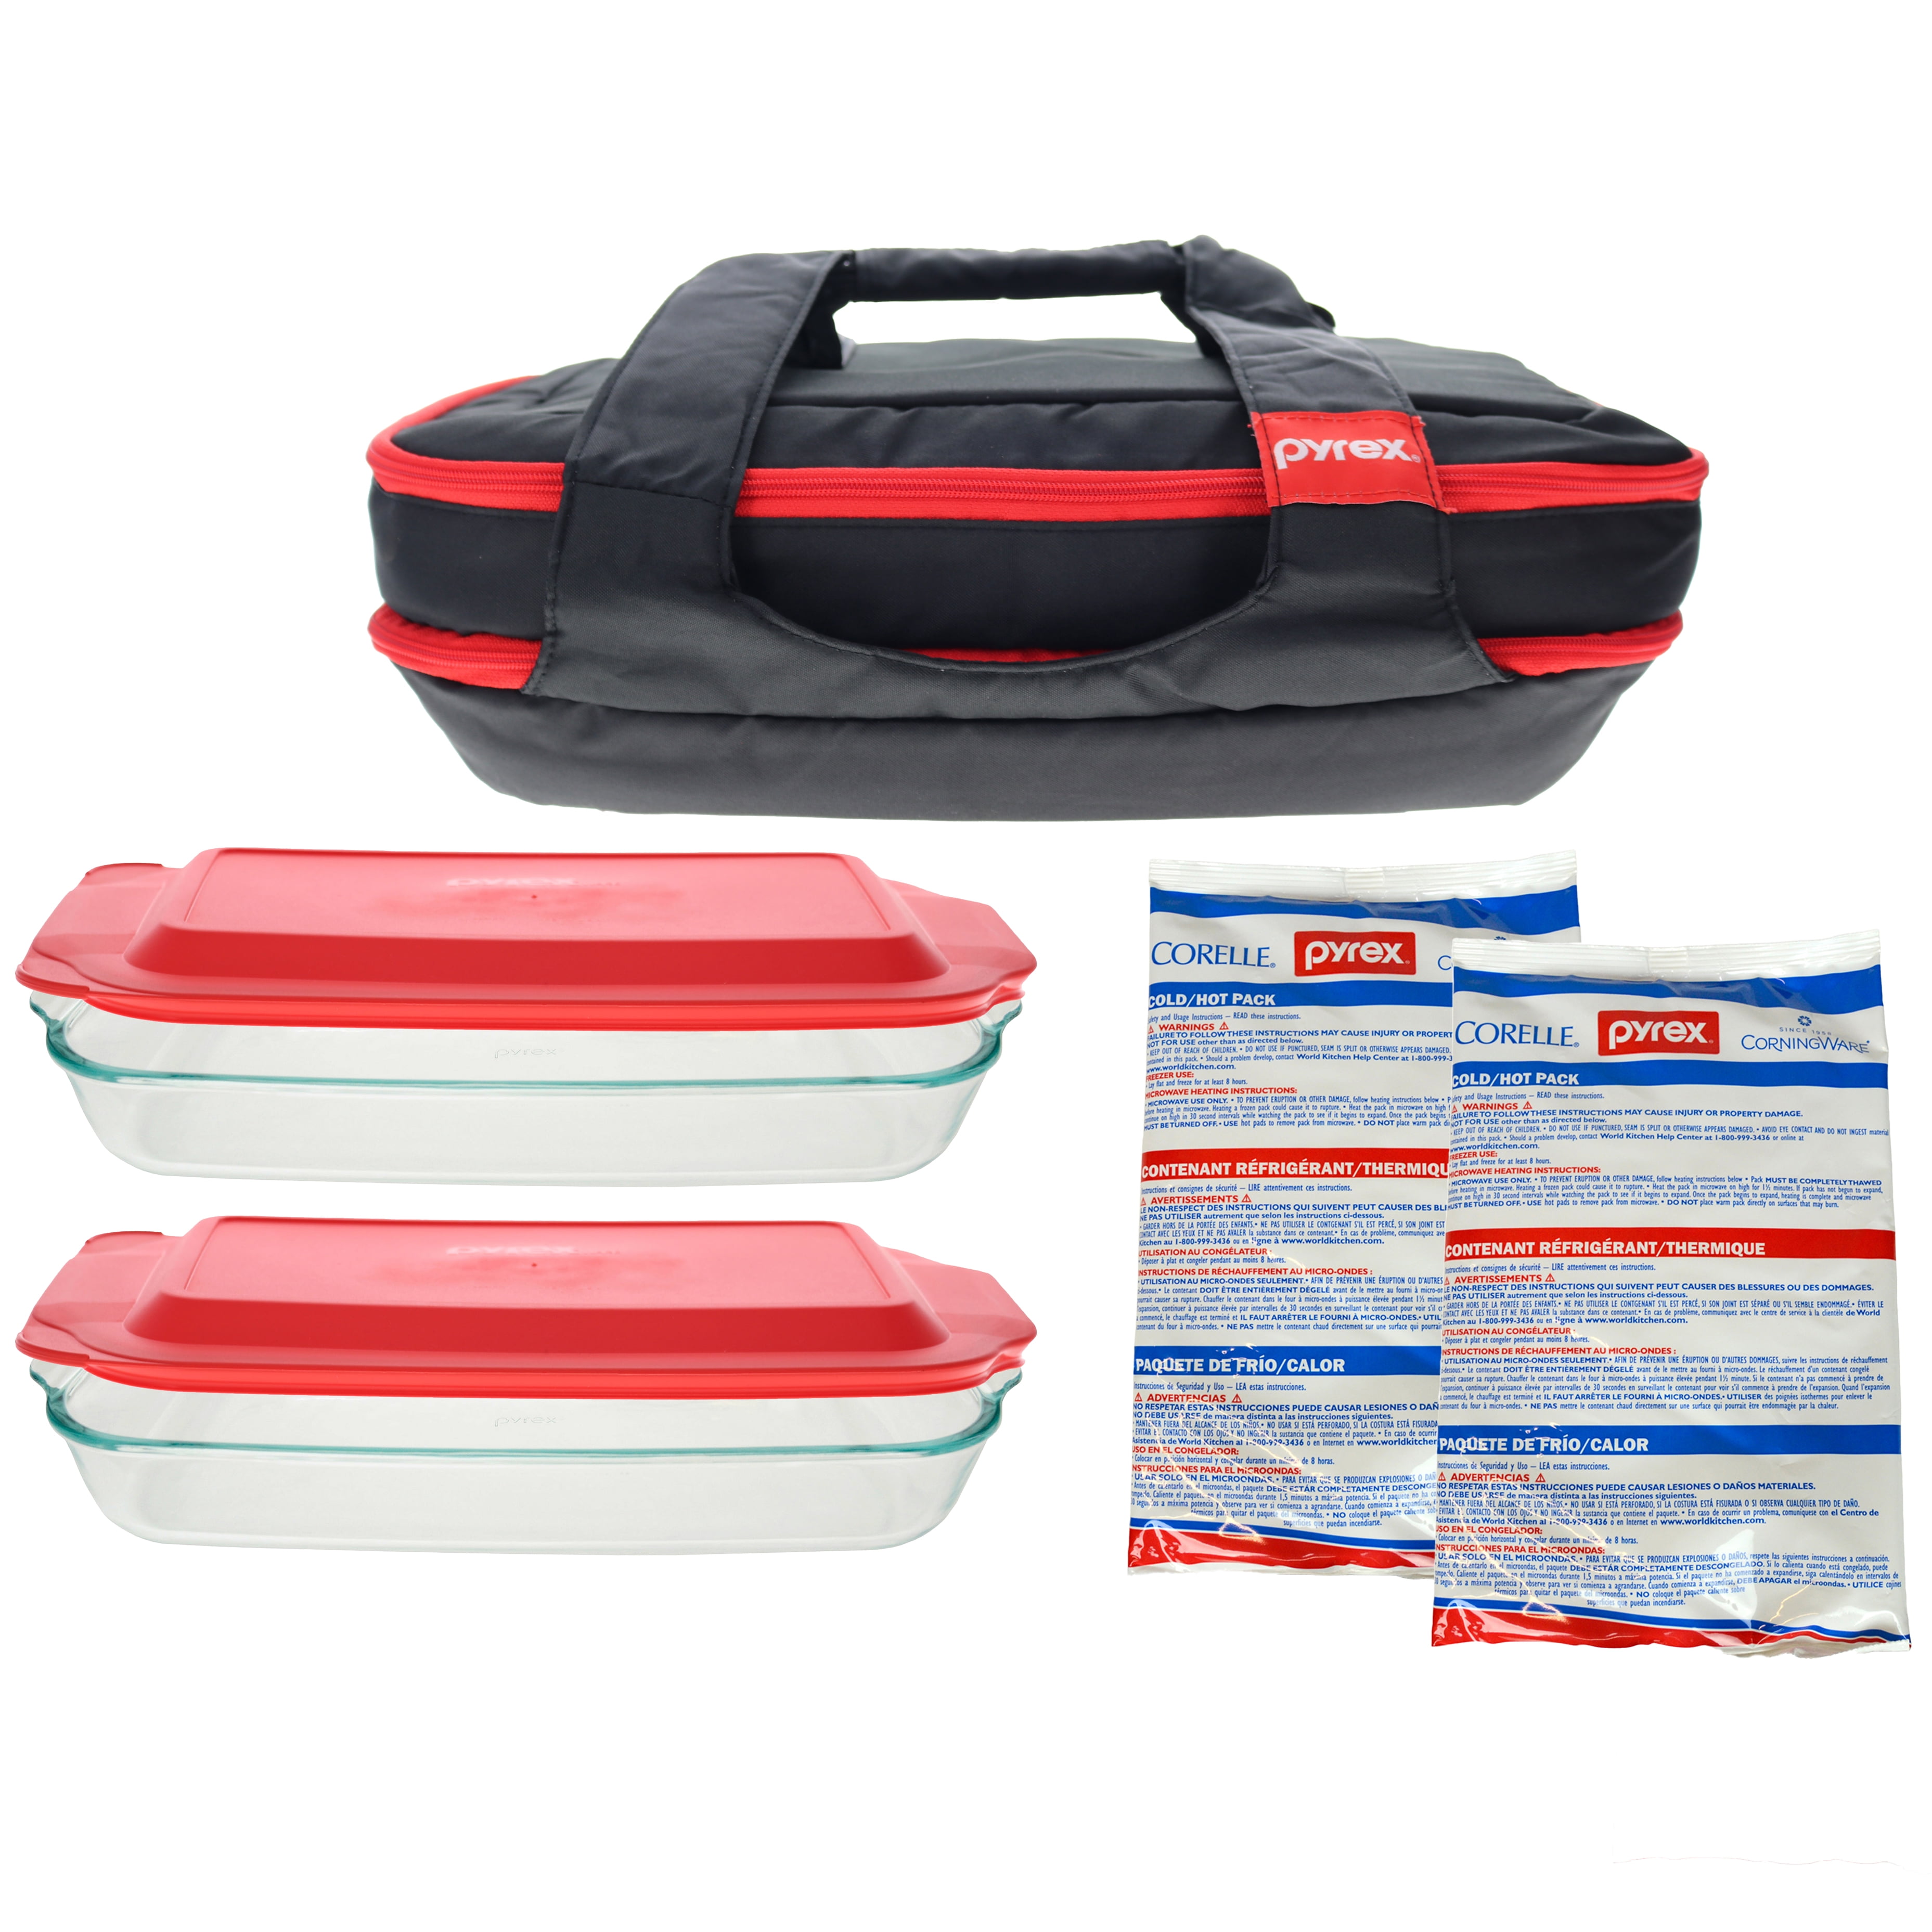 Pyrex Portable Black/Red Insulated Casserole Carrier for Hot or Cold Food,  Lasagna Holder for Picnic, Potluck, Cookout – Comes with (2) 9”x13” or